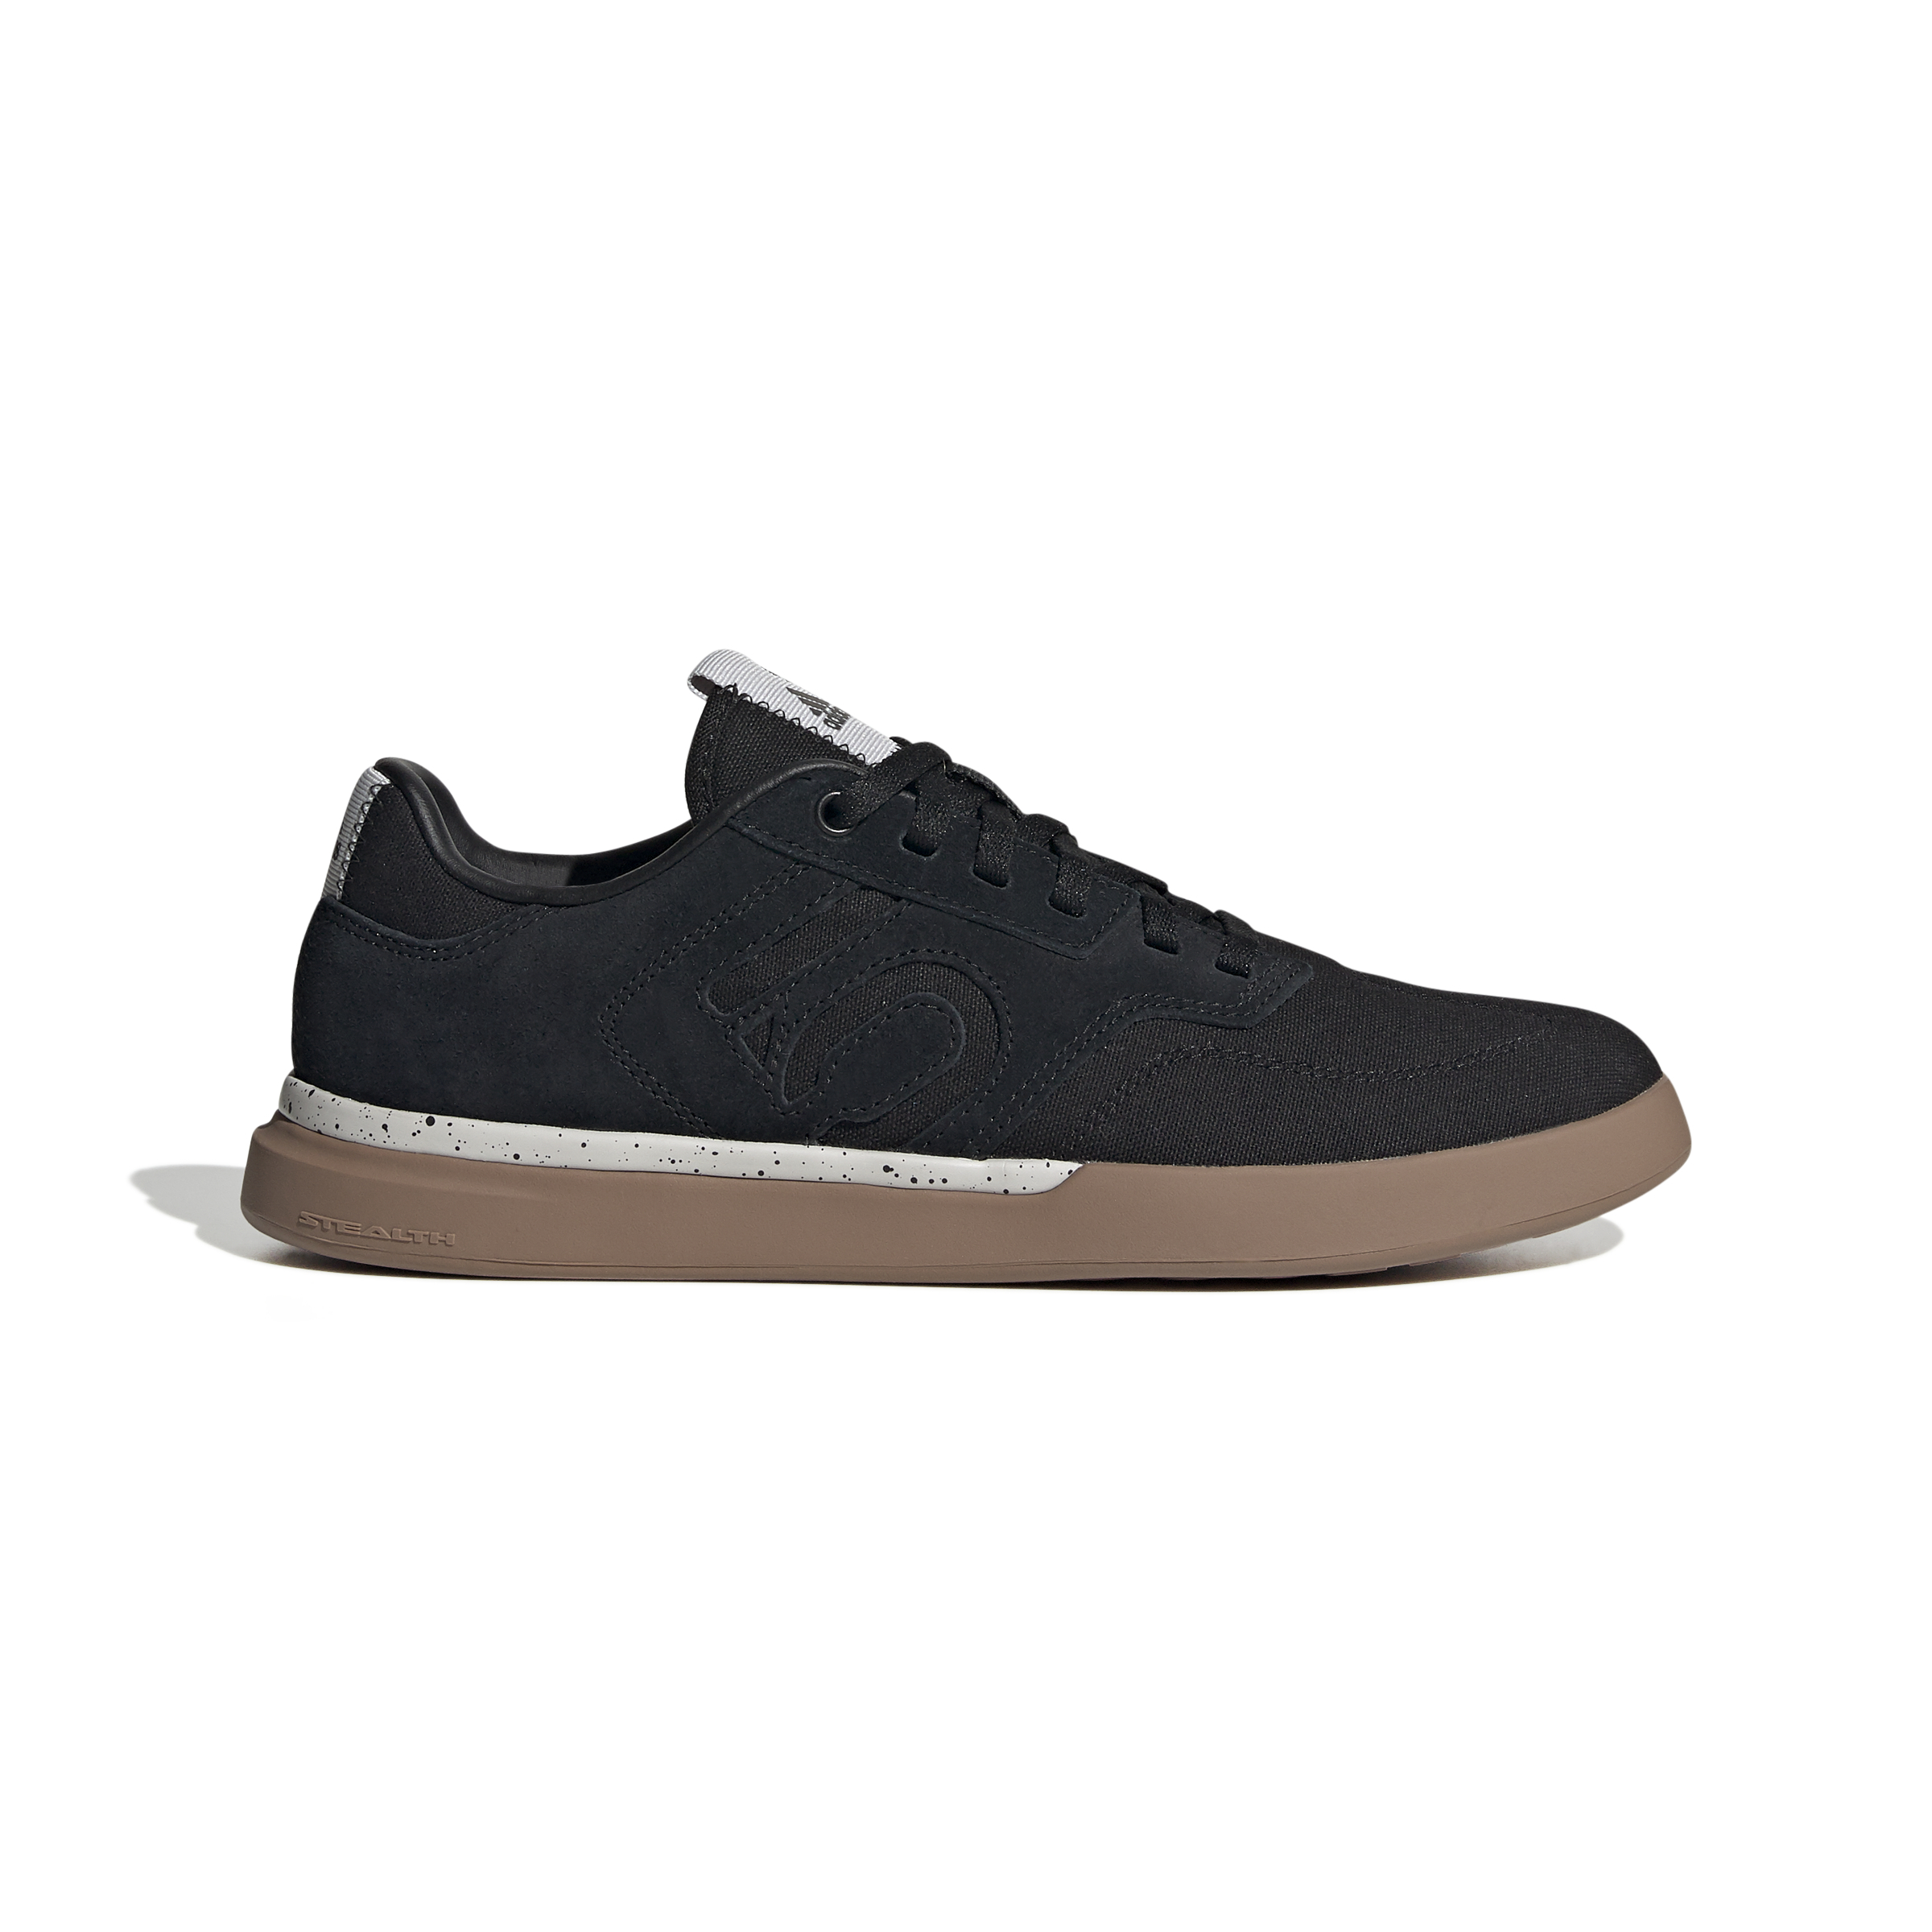 Chaussures femme adidas Five Ten Sleuth